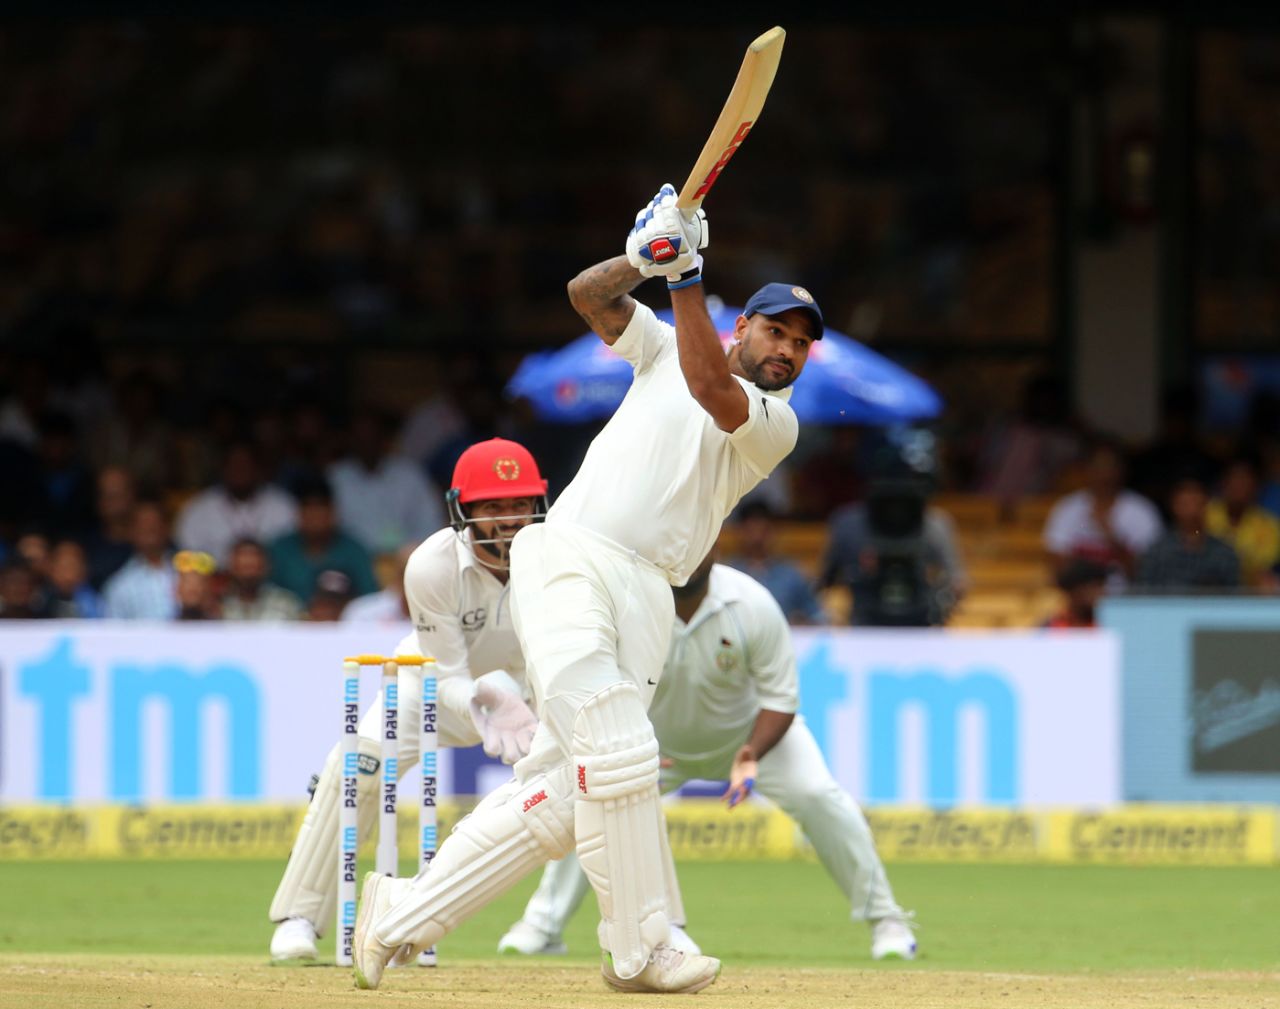 Shikhar Dhawan goes big on the off side, India v Afghanistan, Only Test, Bengaluru, 1st day, June 14, 2018